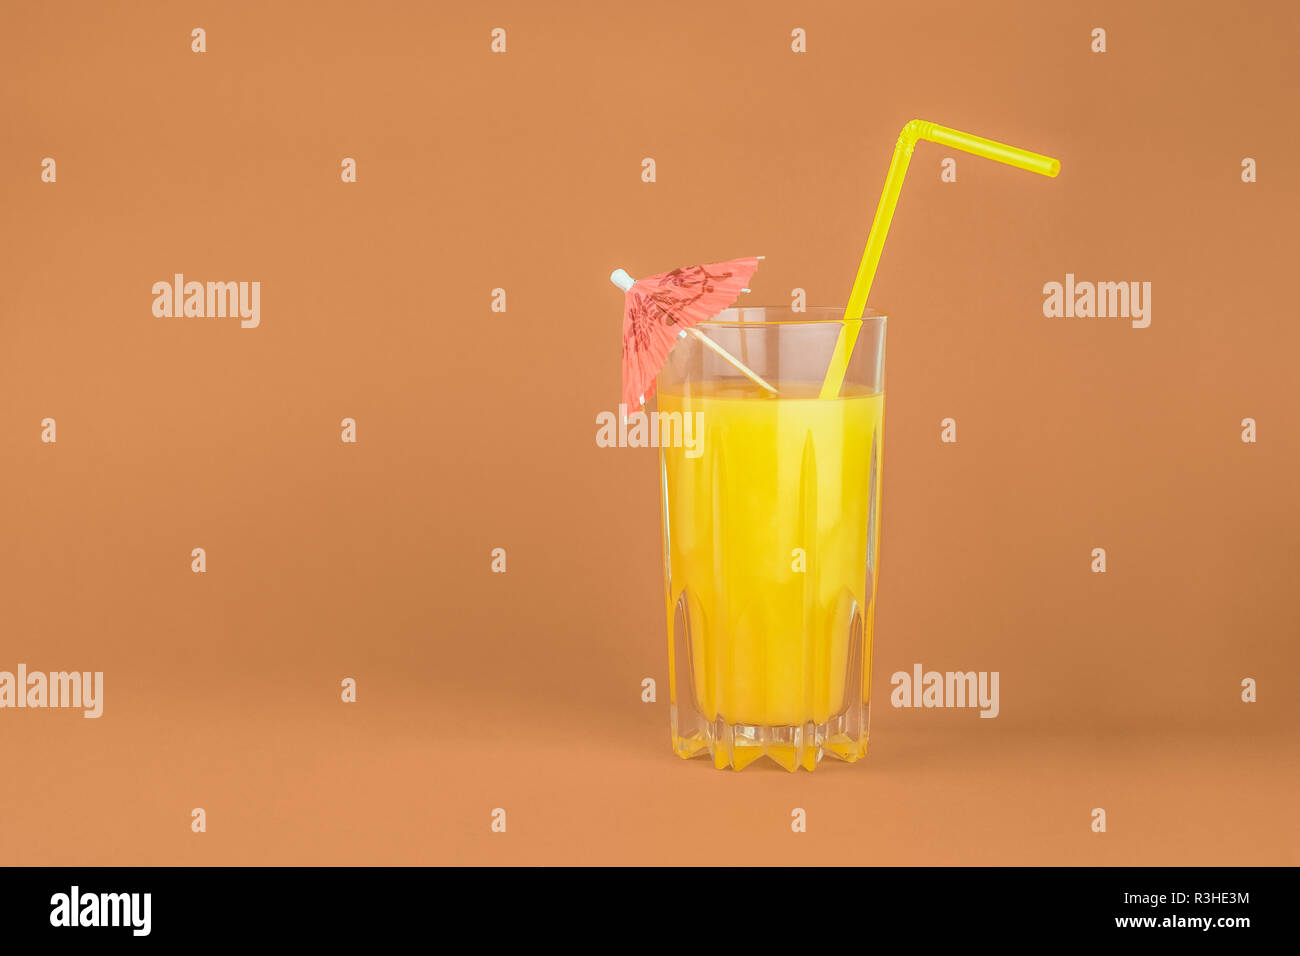 Orange cocktail drink on red background.  Image of citrus juice glass at bright minimalistic environment. Stock Photo